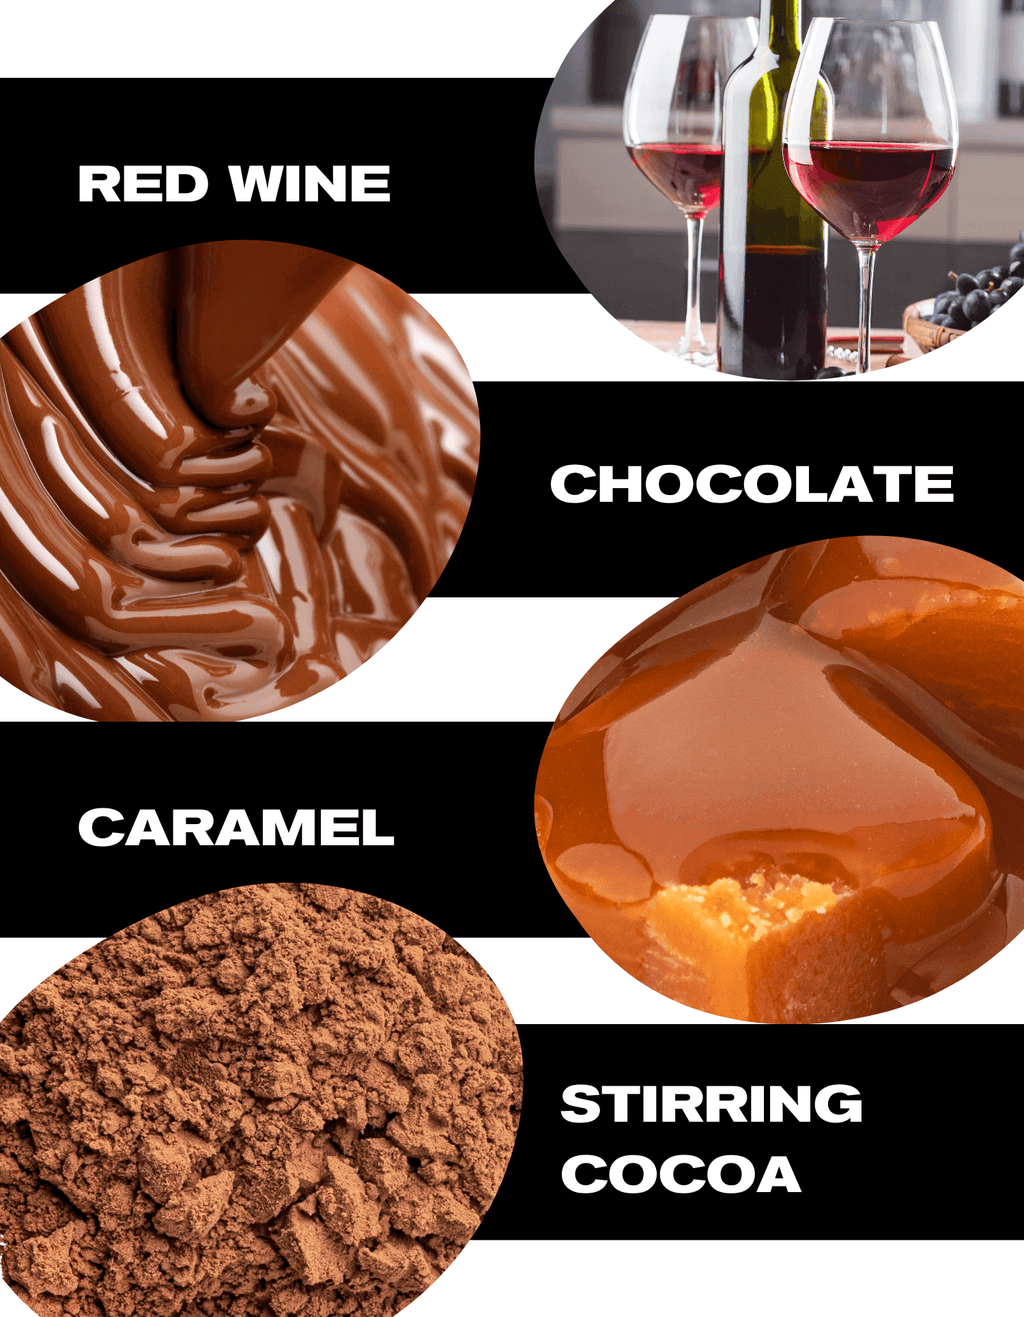 notes-coffee-red-wine-chocolate-caramel-stirring-cocoa